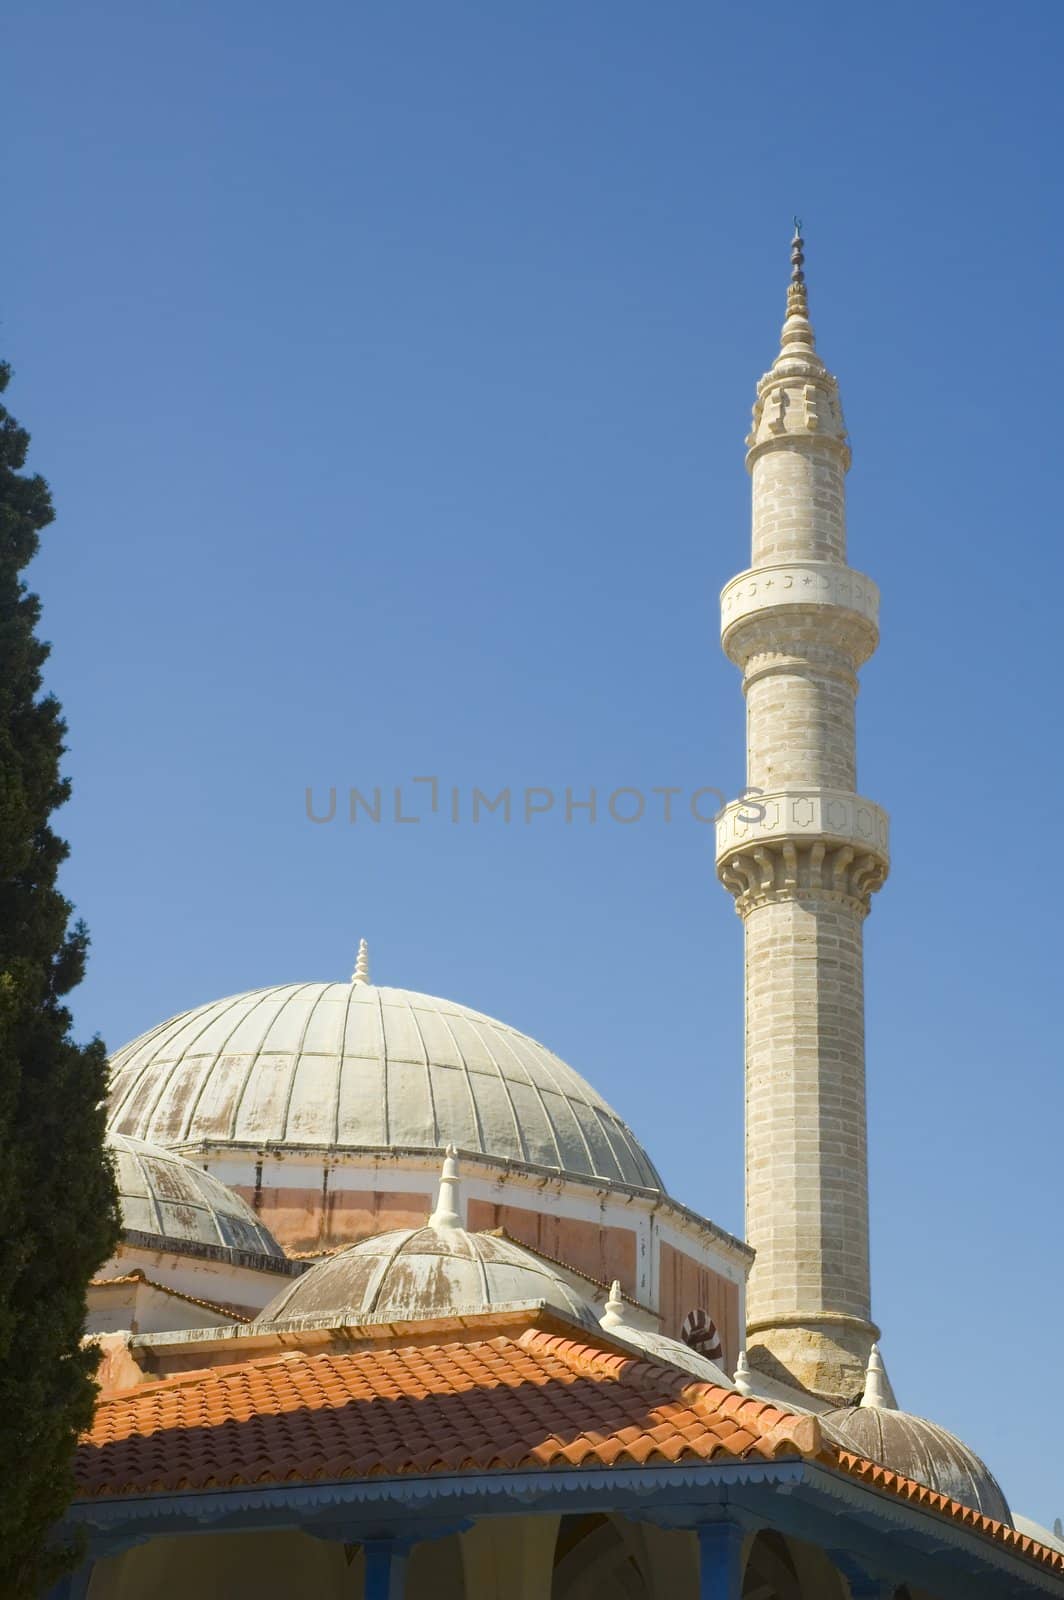 the tower and dome of a Islamic mosque in Rhodes Greece